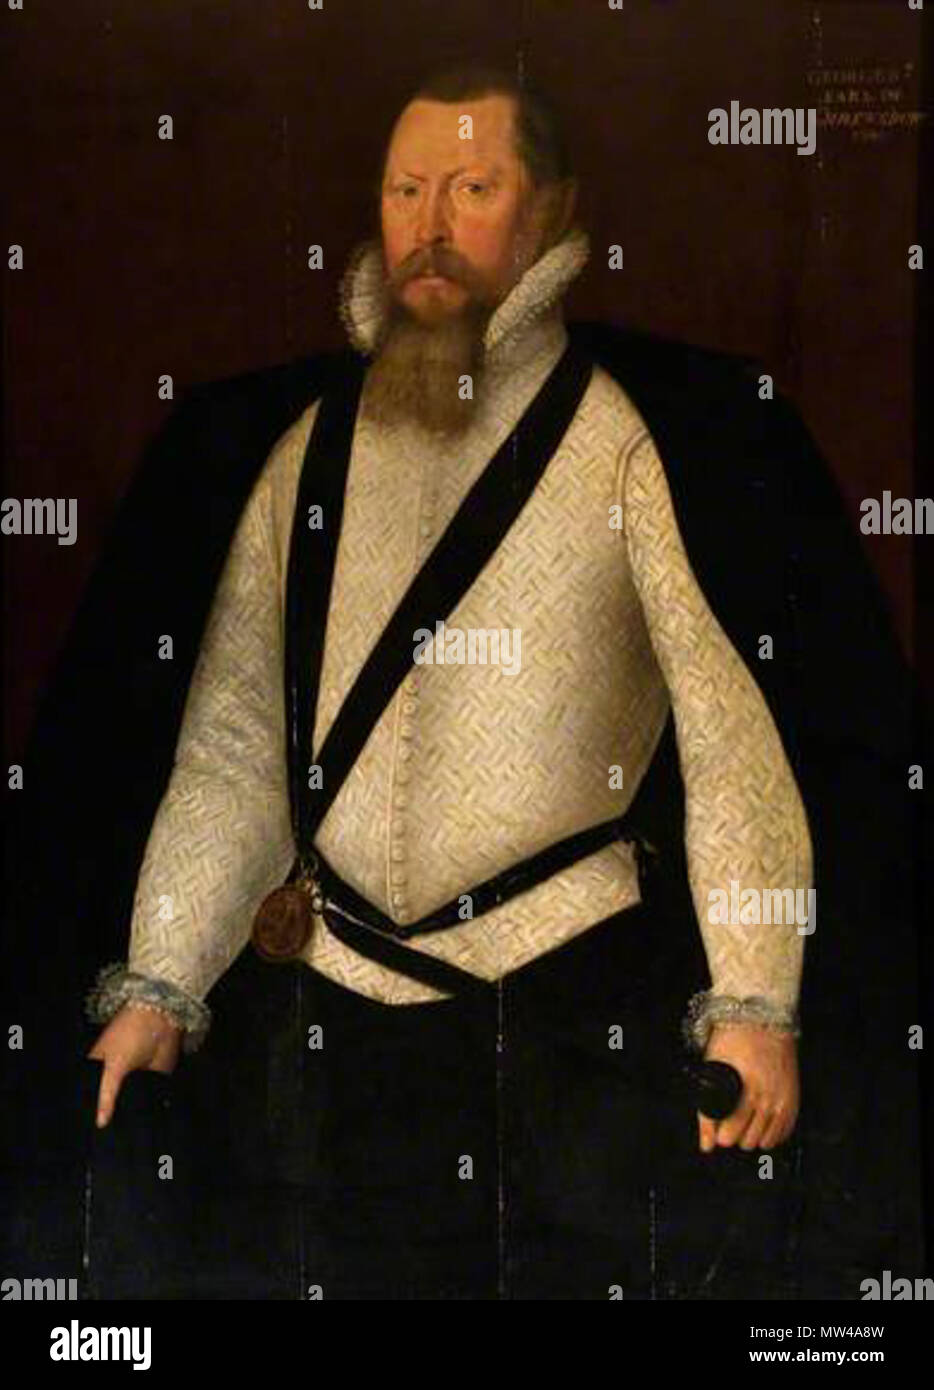 . English: Portrait of George Talbot, 6th Earl of Shrewsbury, by an unknown artist of the English school. Dated 1580. Oil on canvas, 110 cm x 90 cm. Courtesy of the collections of Ingestre Hall Residential Arts Centre. 18 January 2012, 04:33:24. unknown painter of the English school 239 George Talbot, 6th Earl of Shrewsbury by an unknown artist 1580 Stock Photo